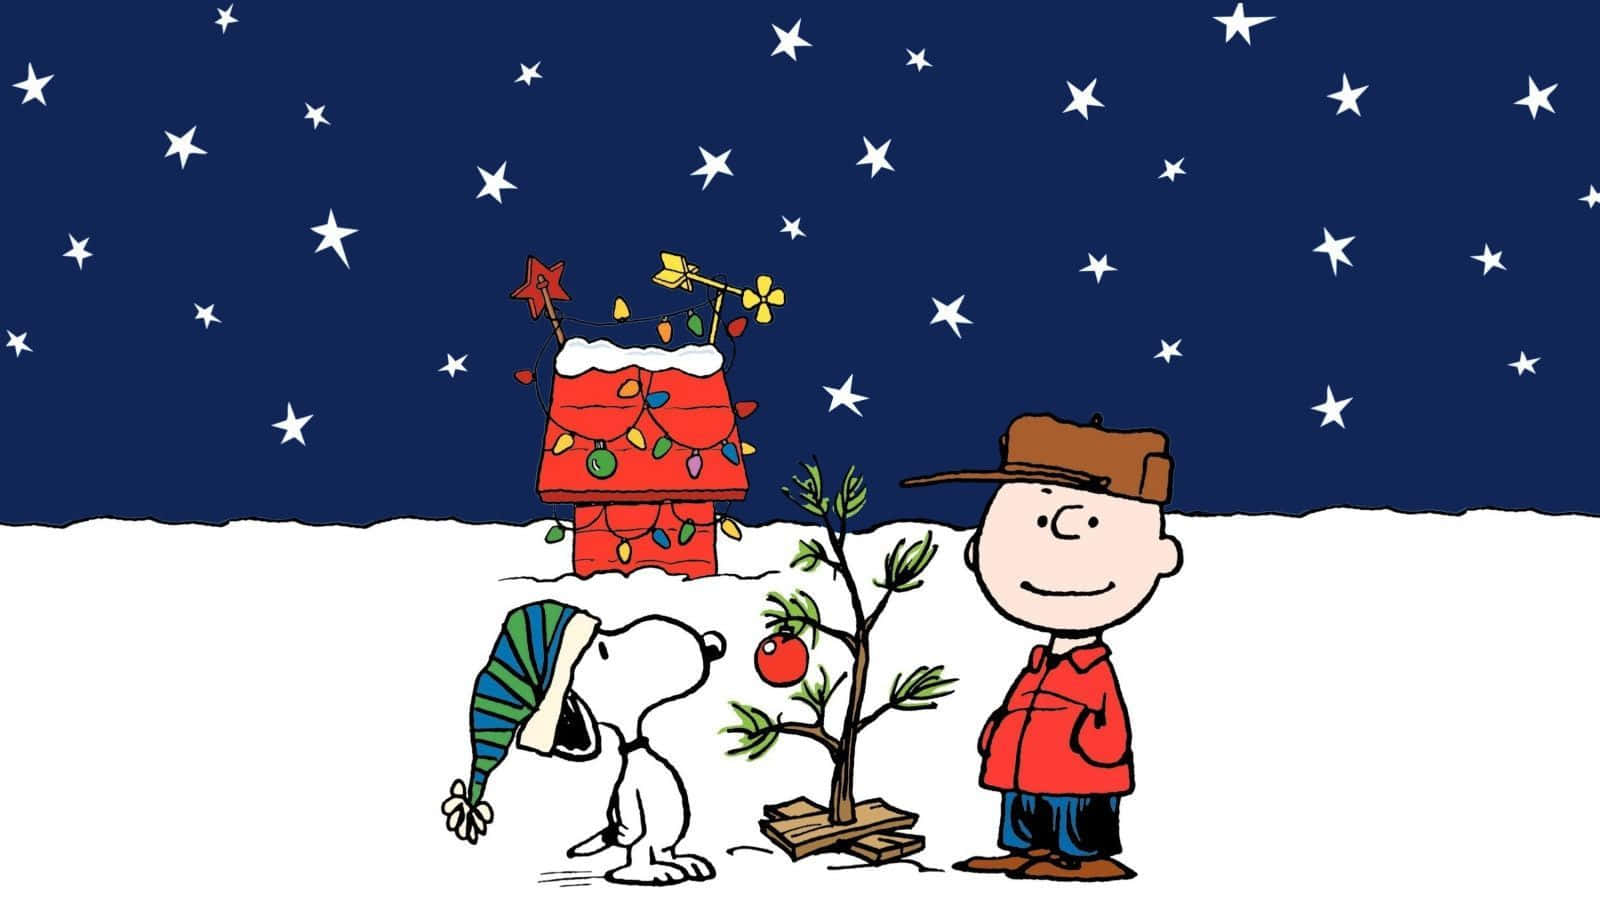 Spread Holiday Cheer With Charlie Brown Background